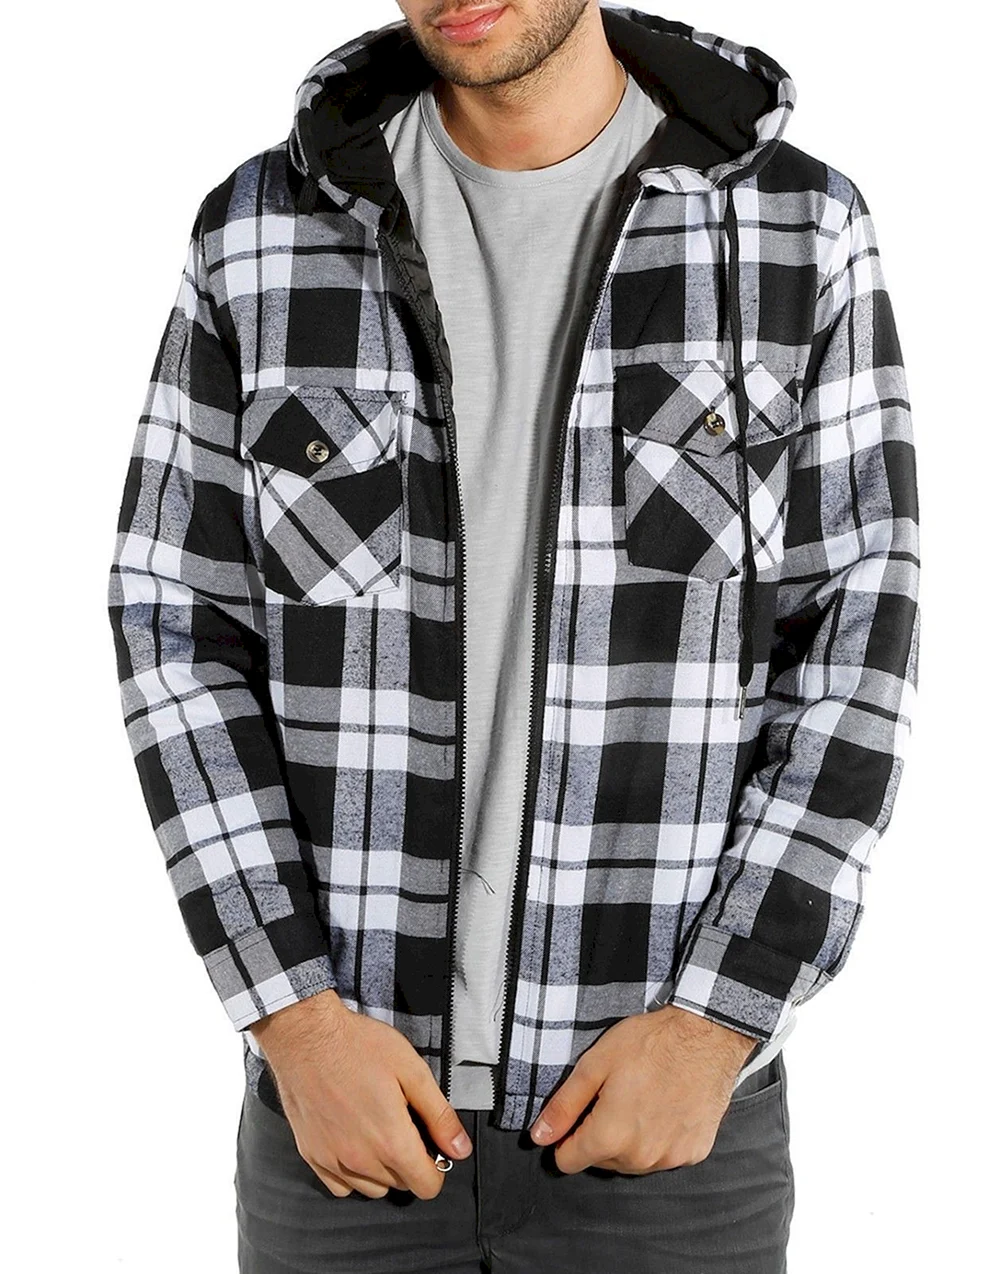 Mens Plaid Flannel Red Jacket with Hood Midweight